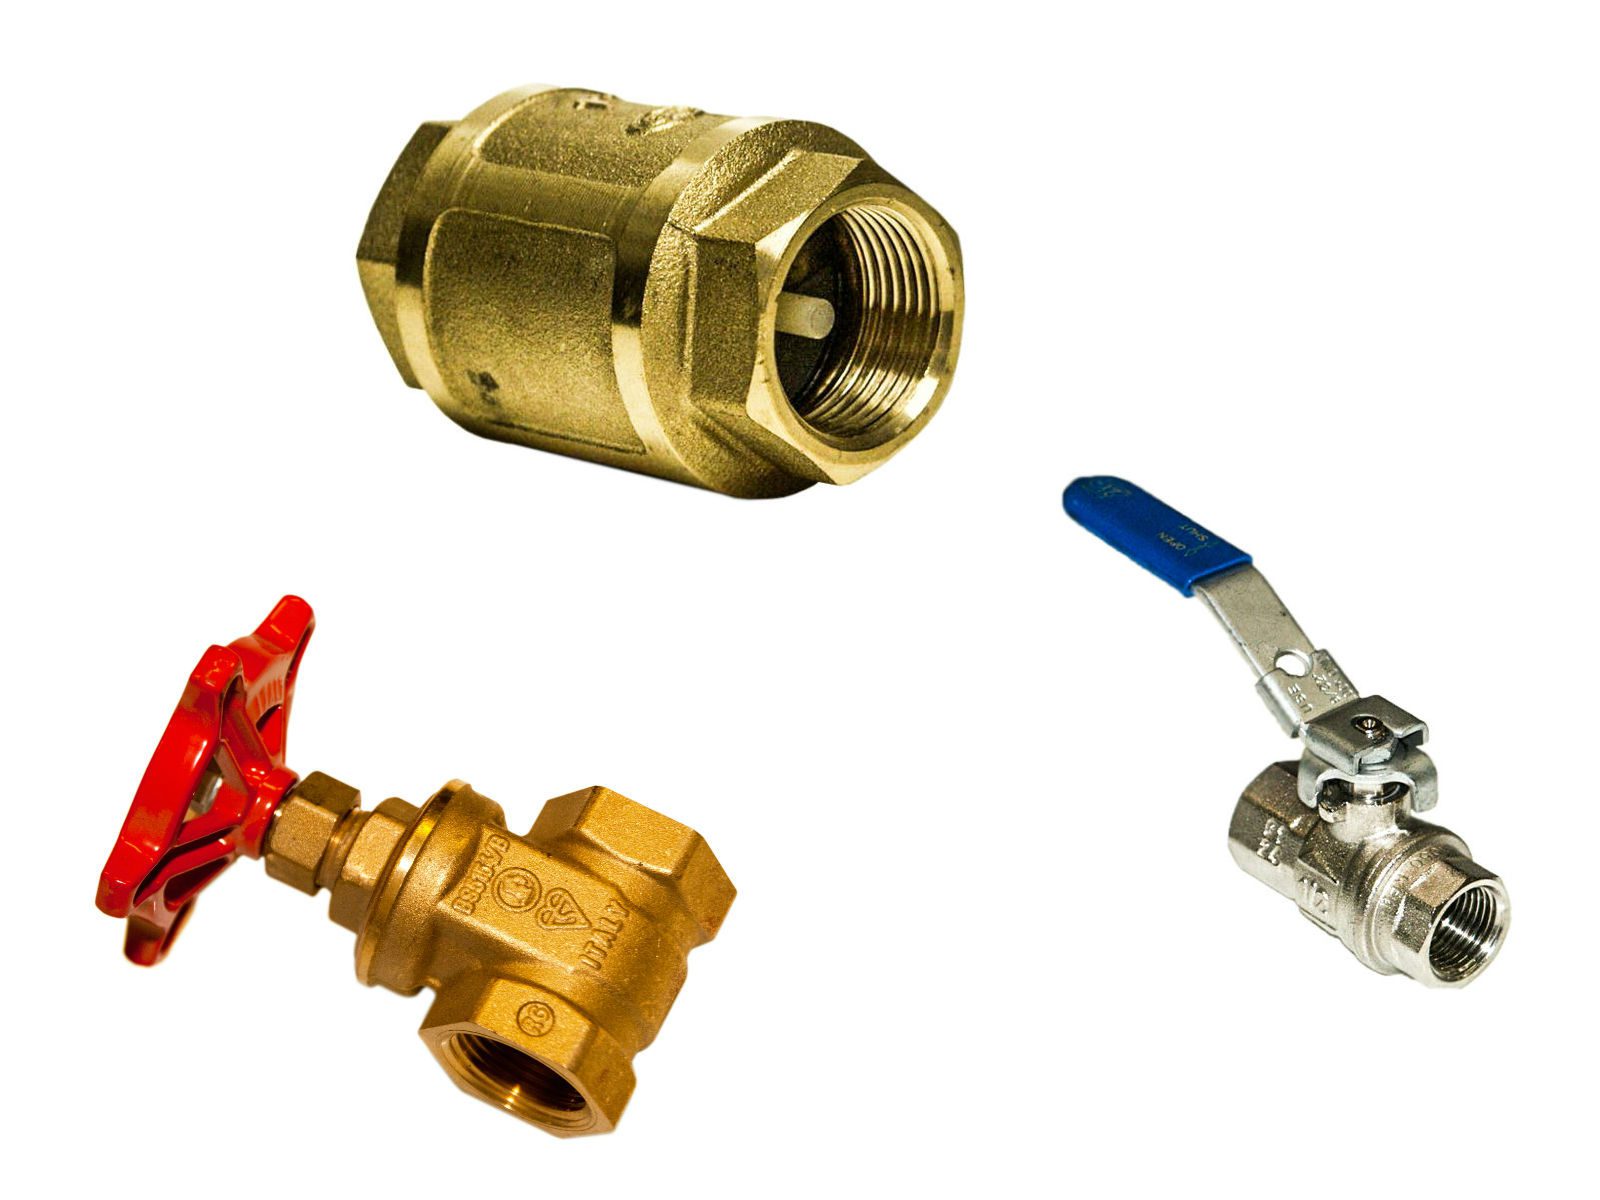 Valves and Accessories for fire sprinklers